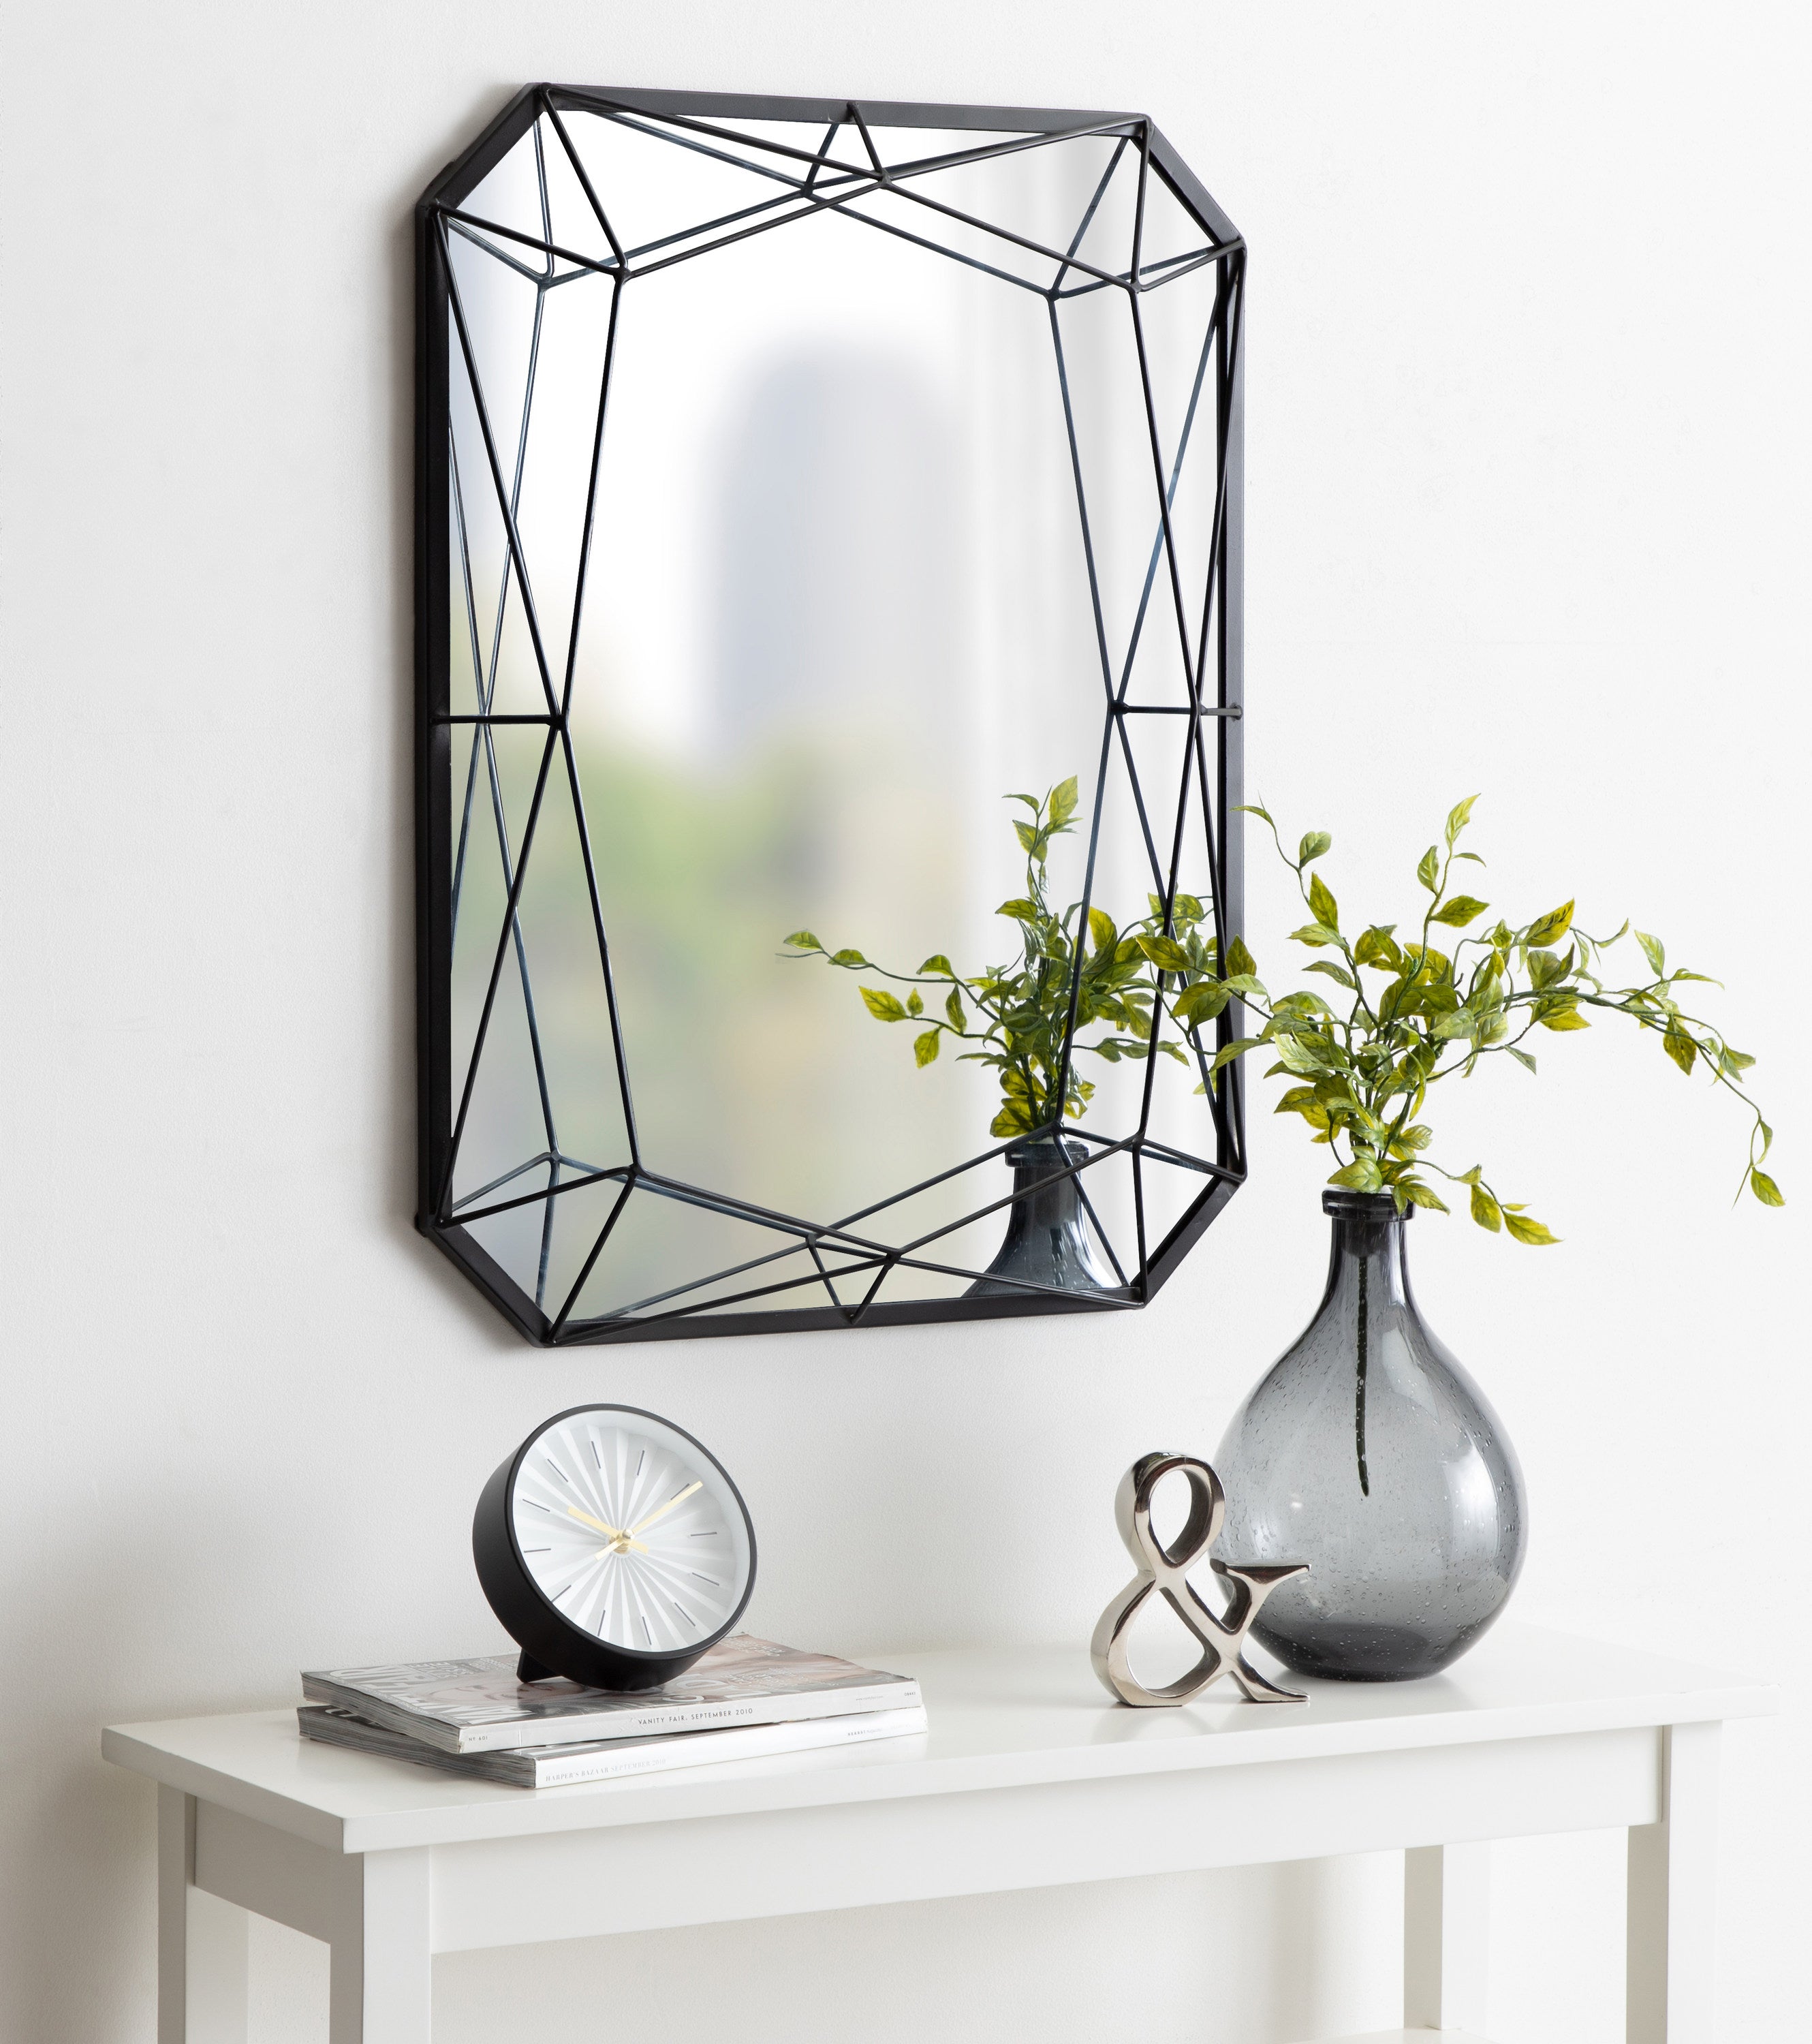 Keyleigh Rectangle Metal Accent Wall Mirror